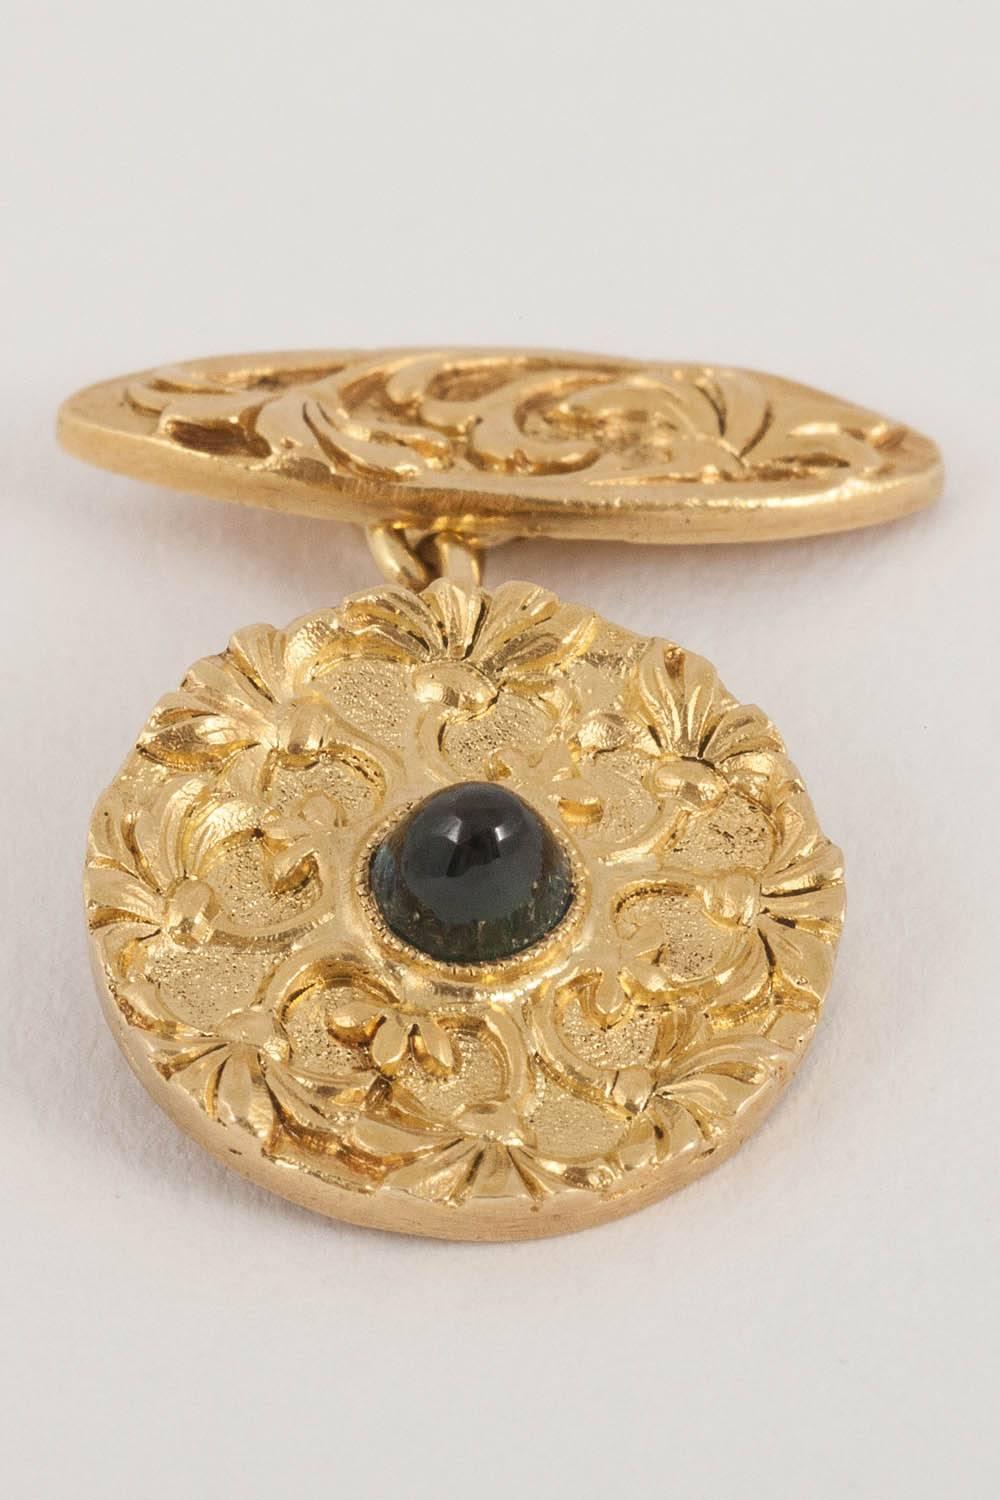 A single sided circular pair of French made, cufflinks,carved floral decoration of flowers, with a cabochon shaped sapphire centre,on chain links to a similarly carved long oval connection.C,1900